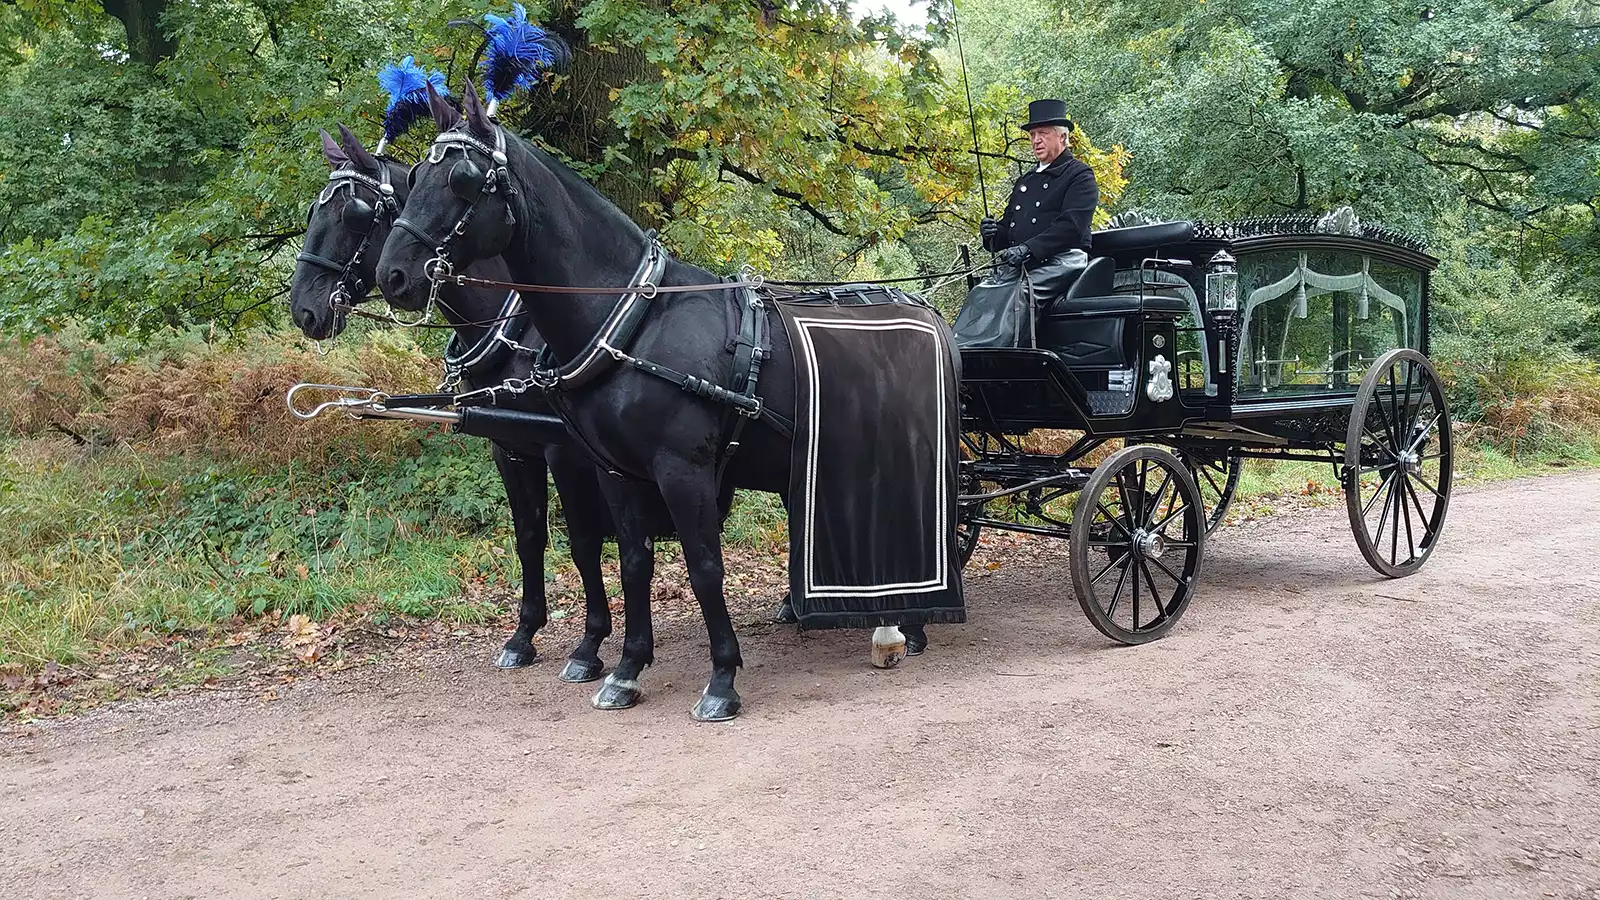 Horse drawn funeral carriage south wales 06